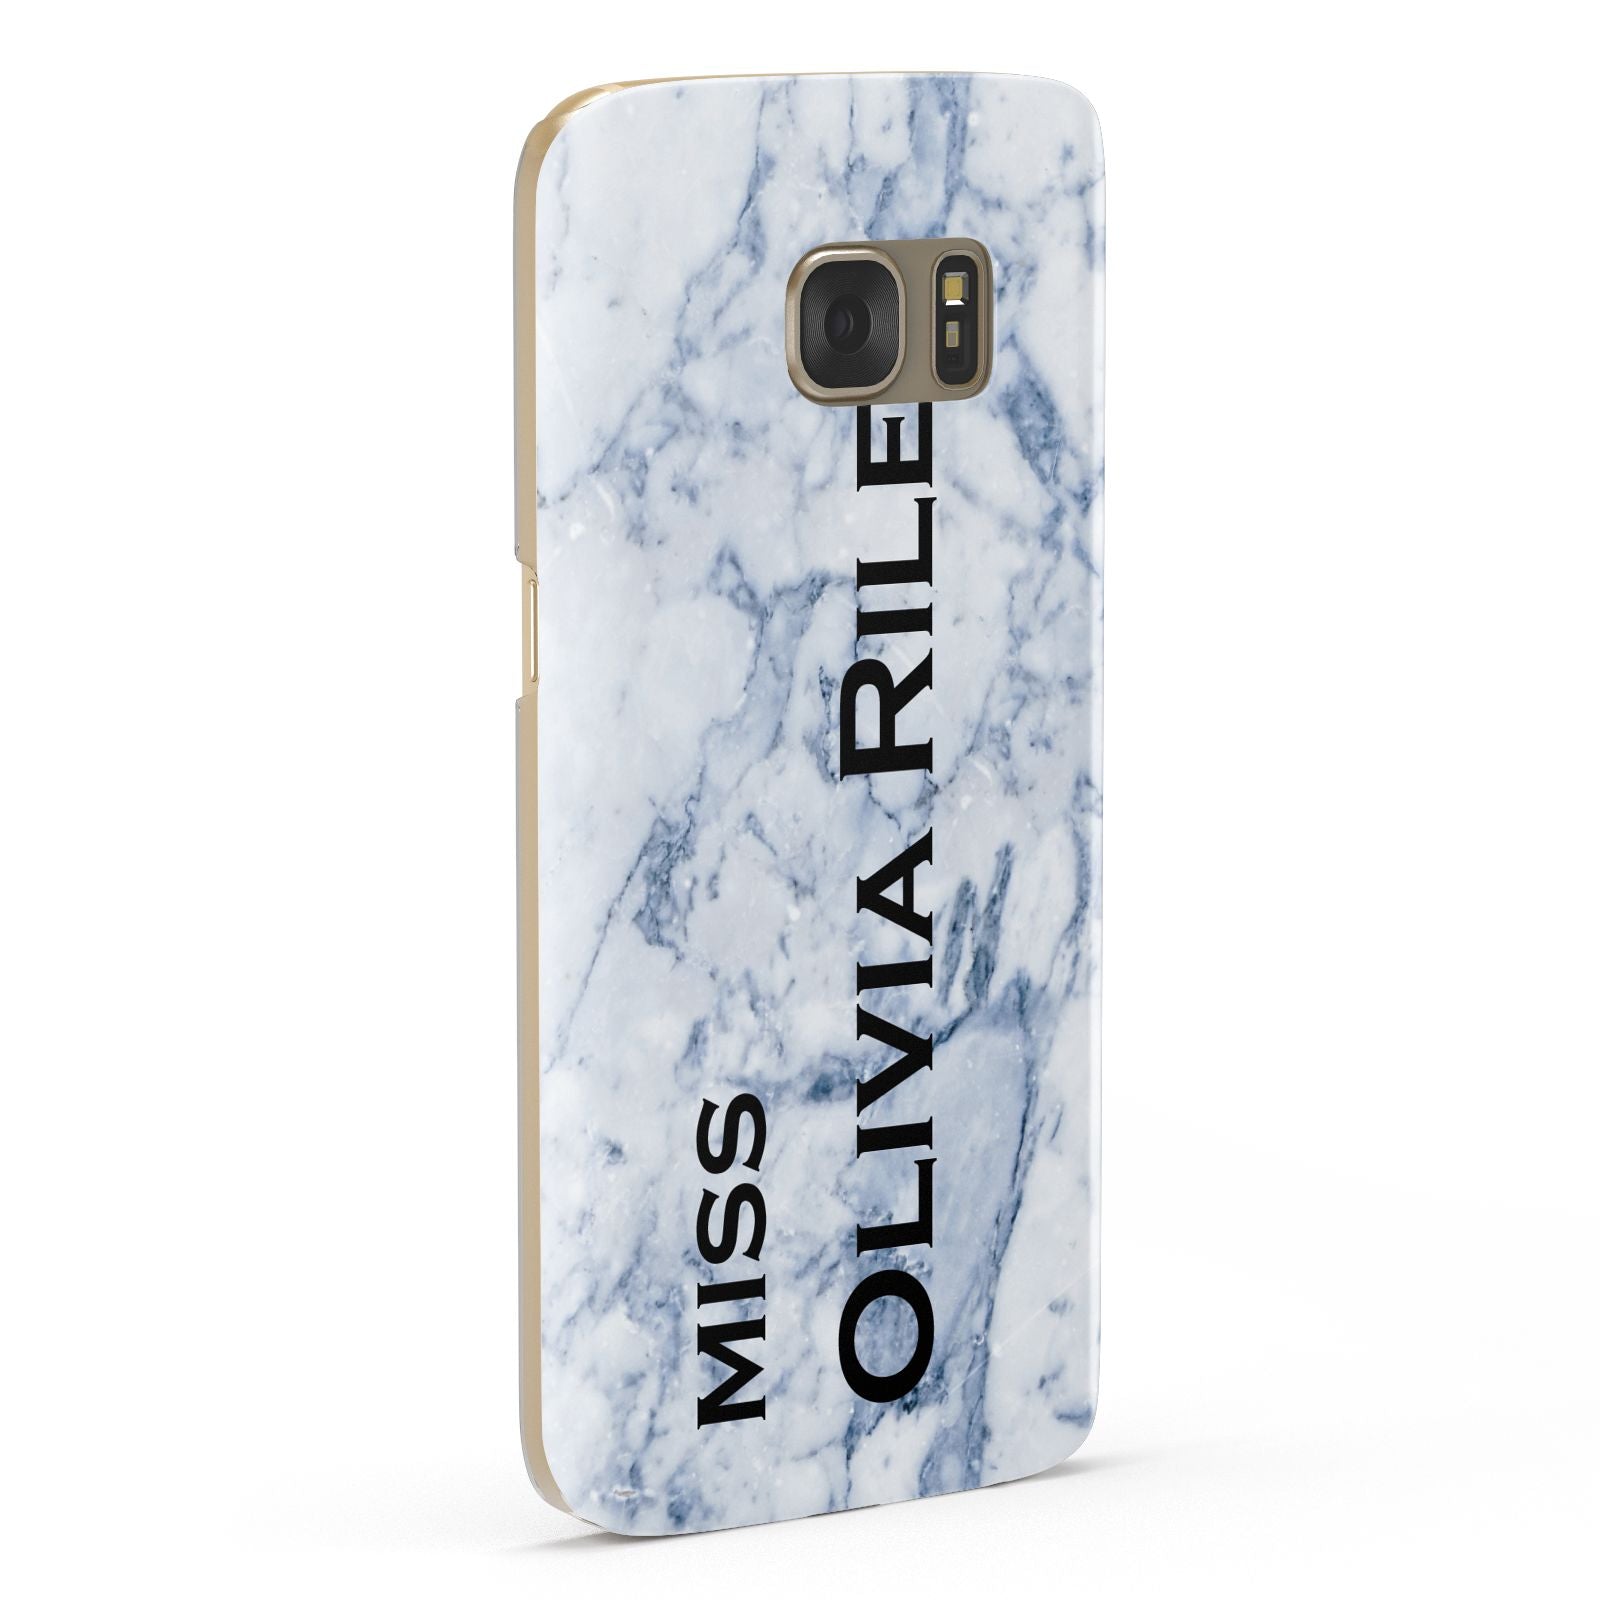 Full Name Grey Marble Samsung Galaxy Case Fourty Five Degrees